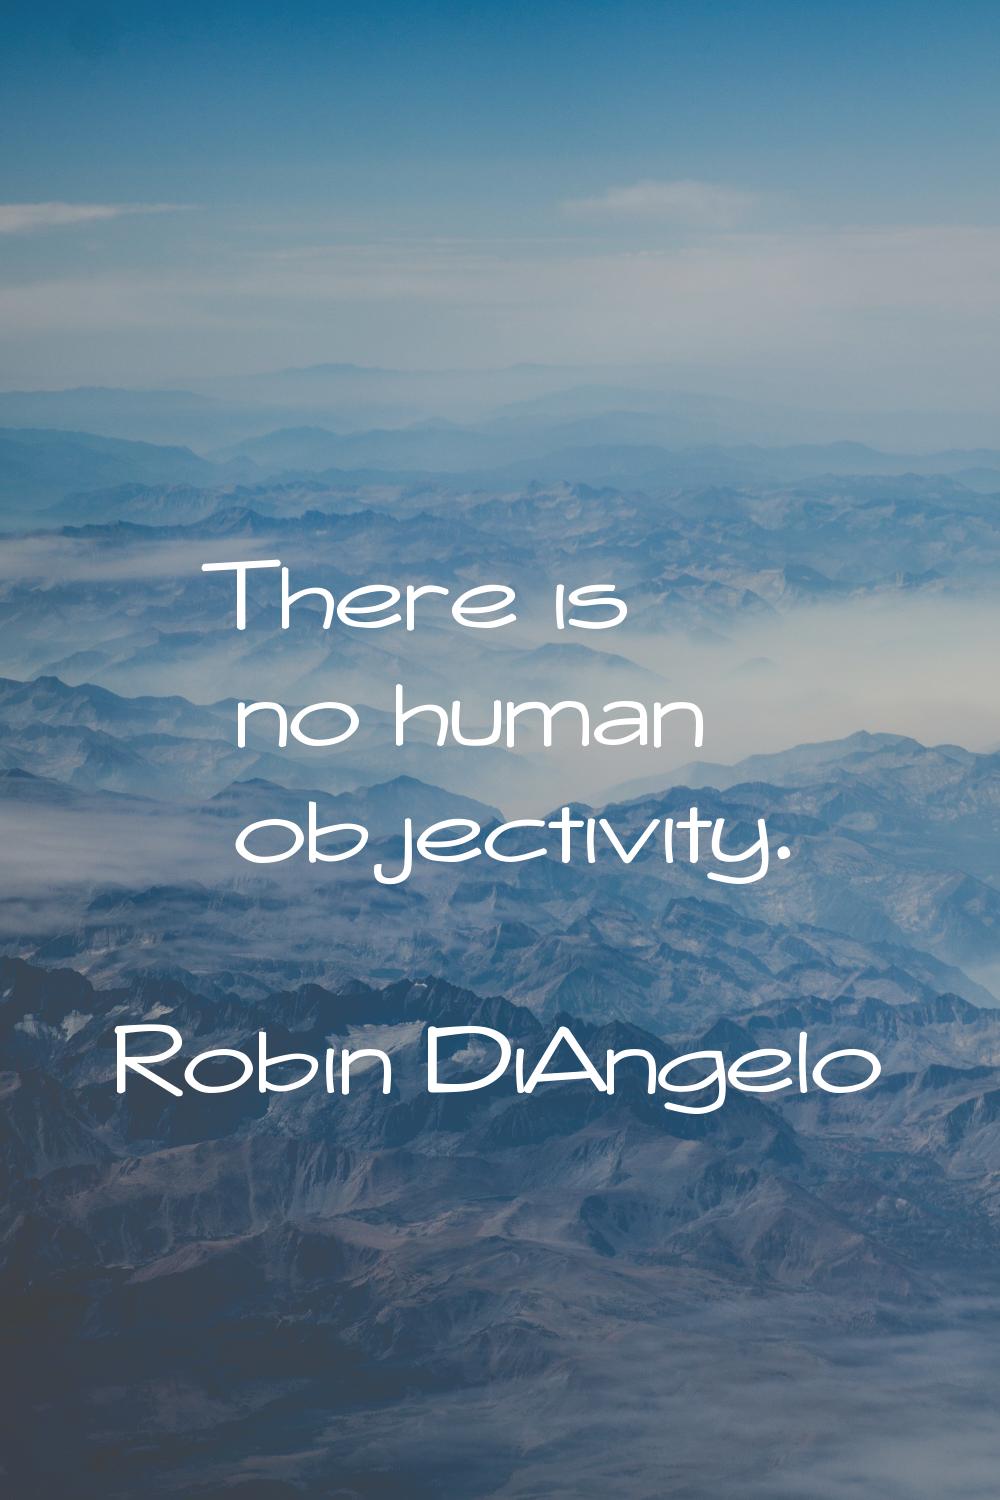 There is no human objectivity.